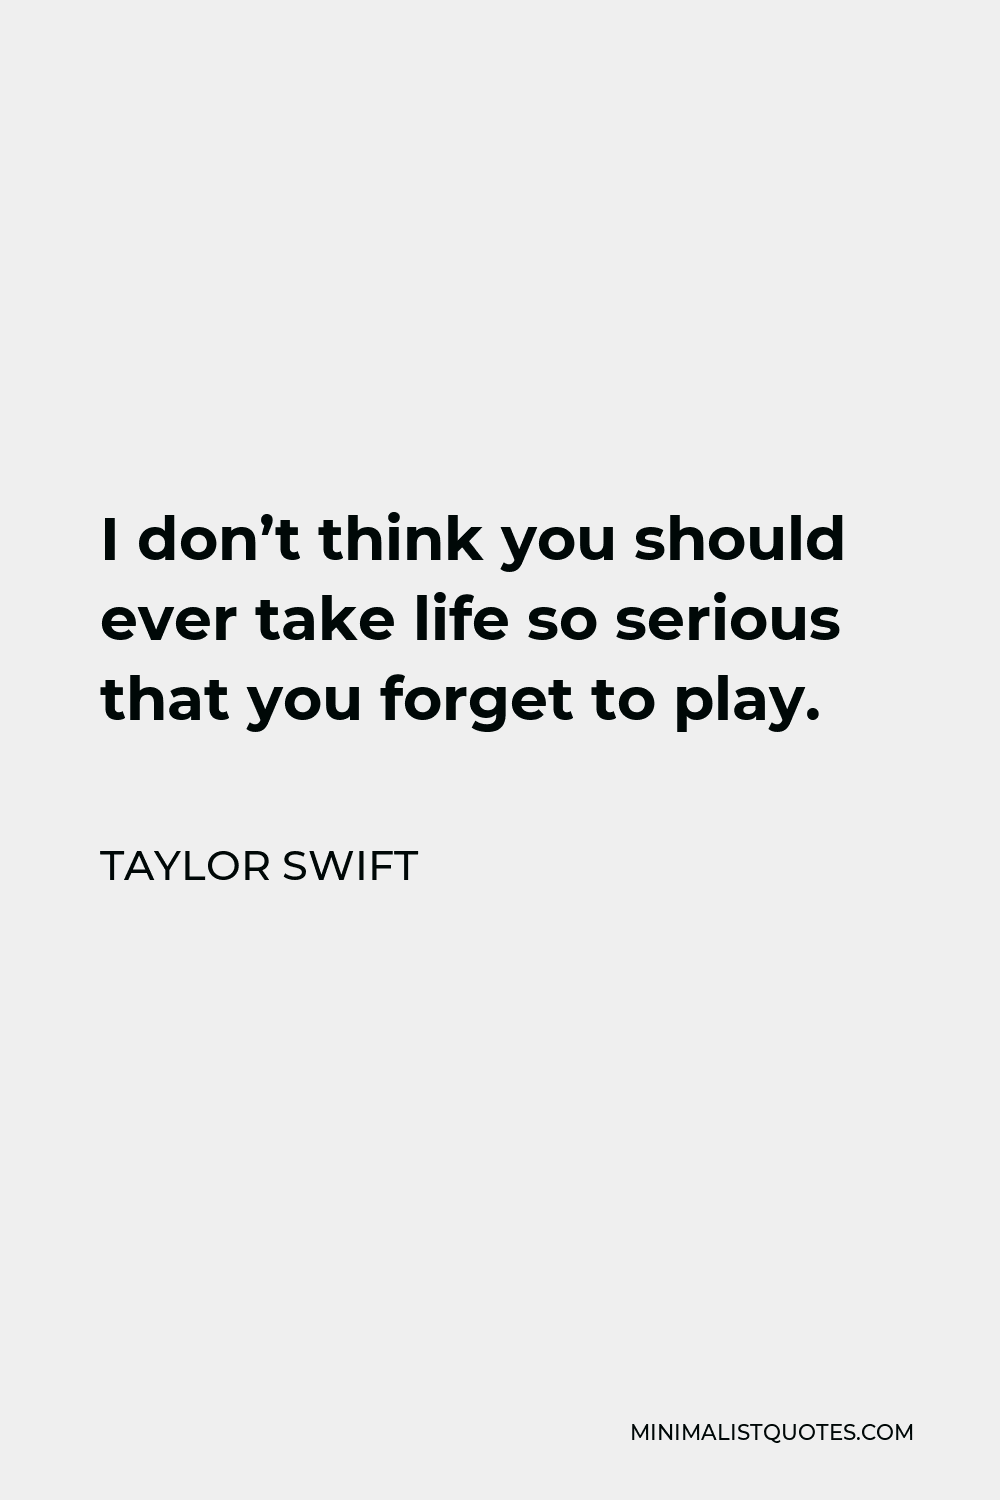 Taylor Swift Quote - I don’t think you should ever take life so serious that you forget to play.